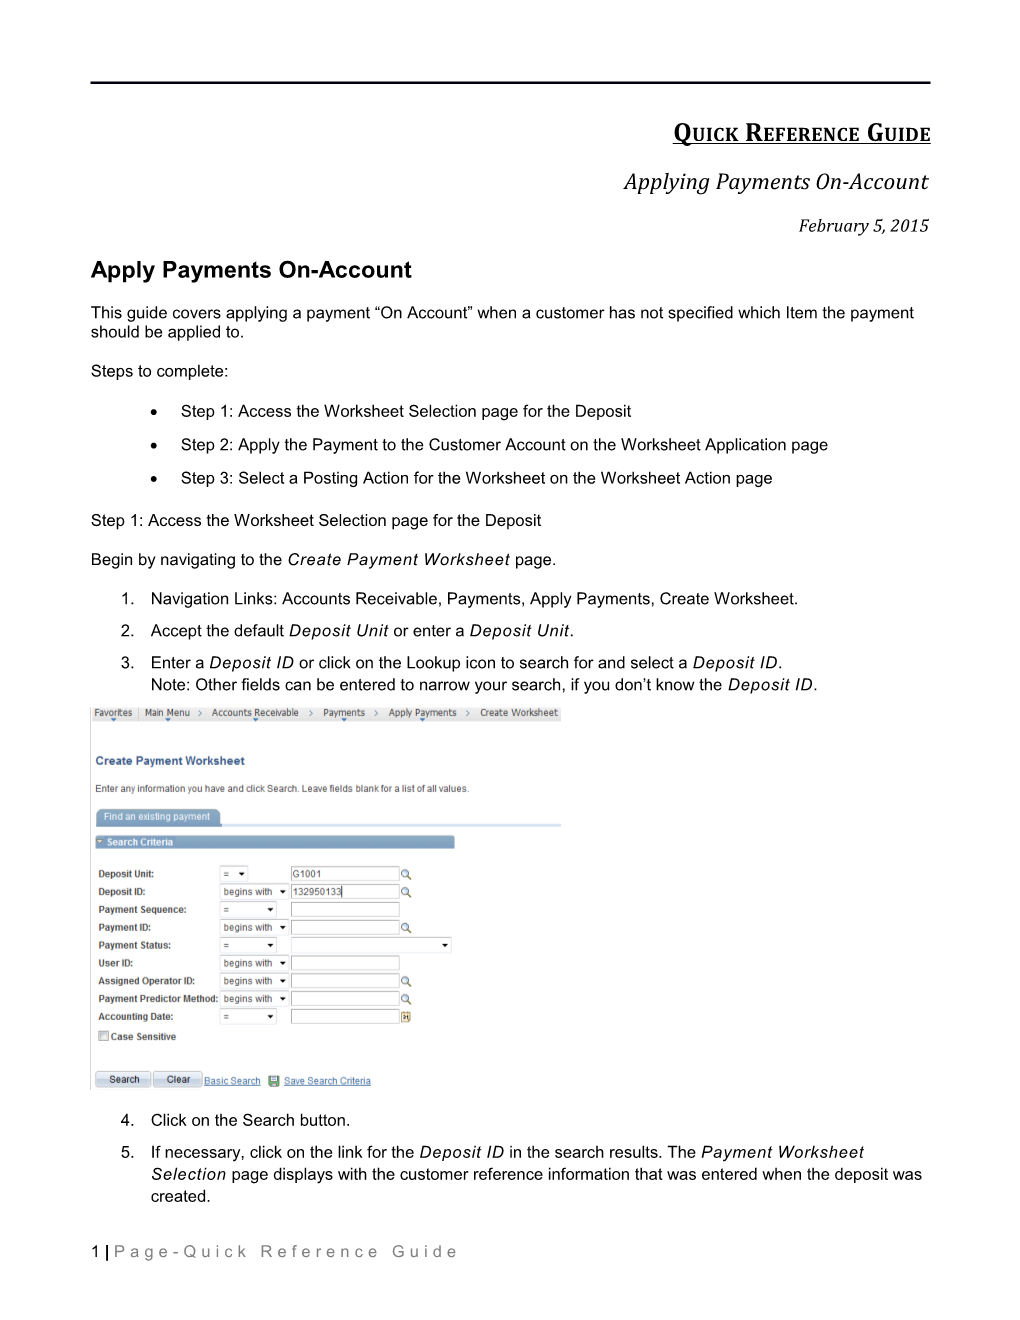 Applying Payments on Account Quick Reference Guide